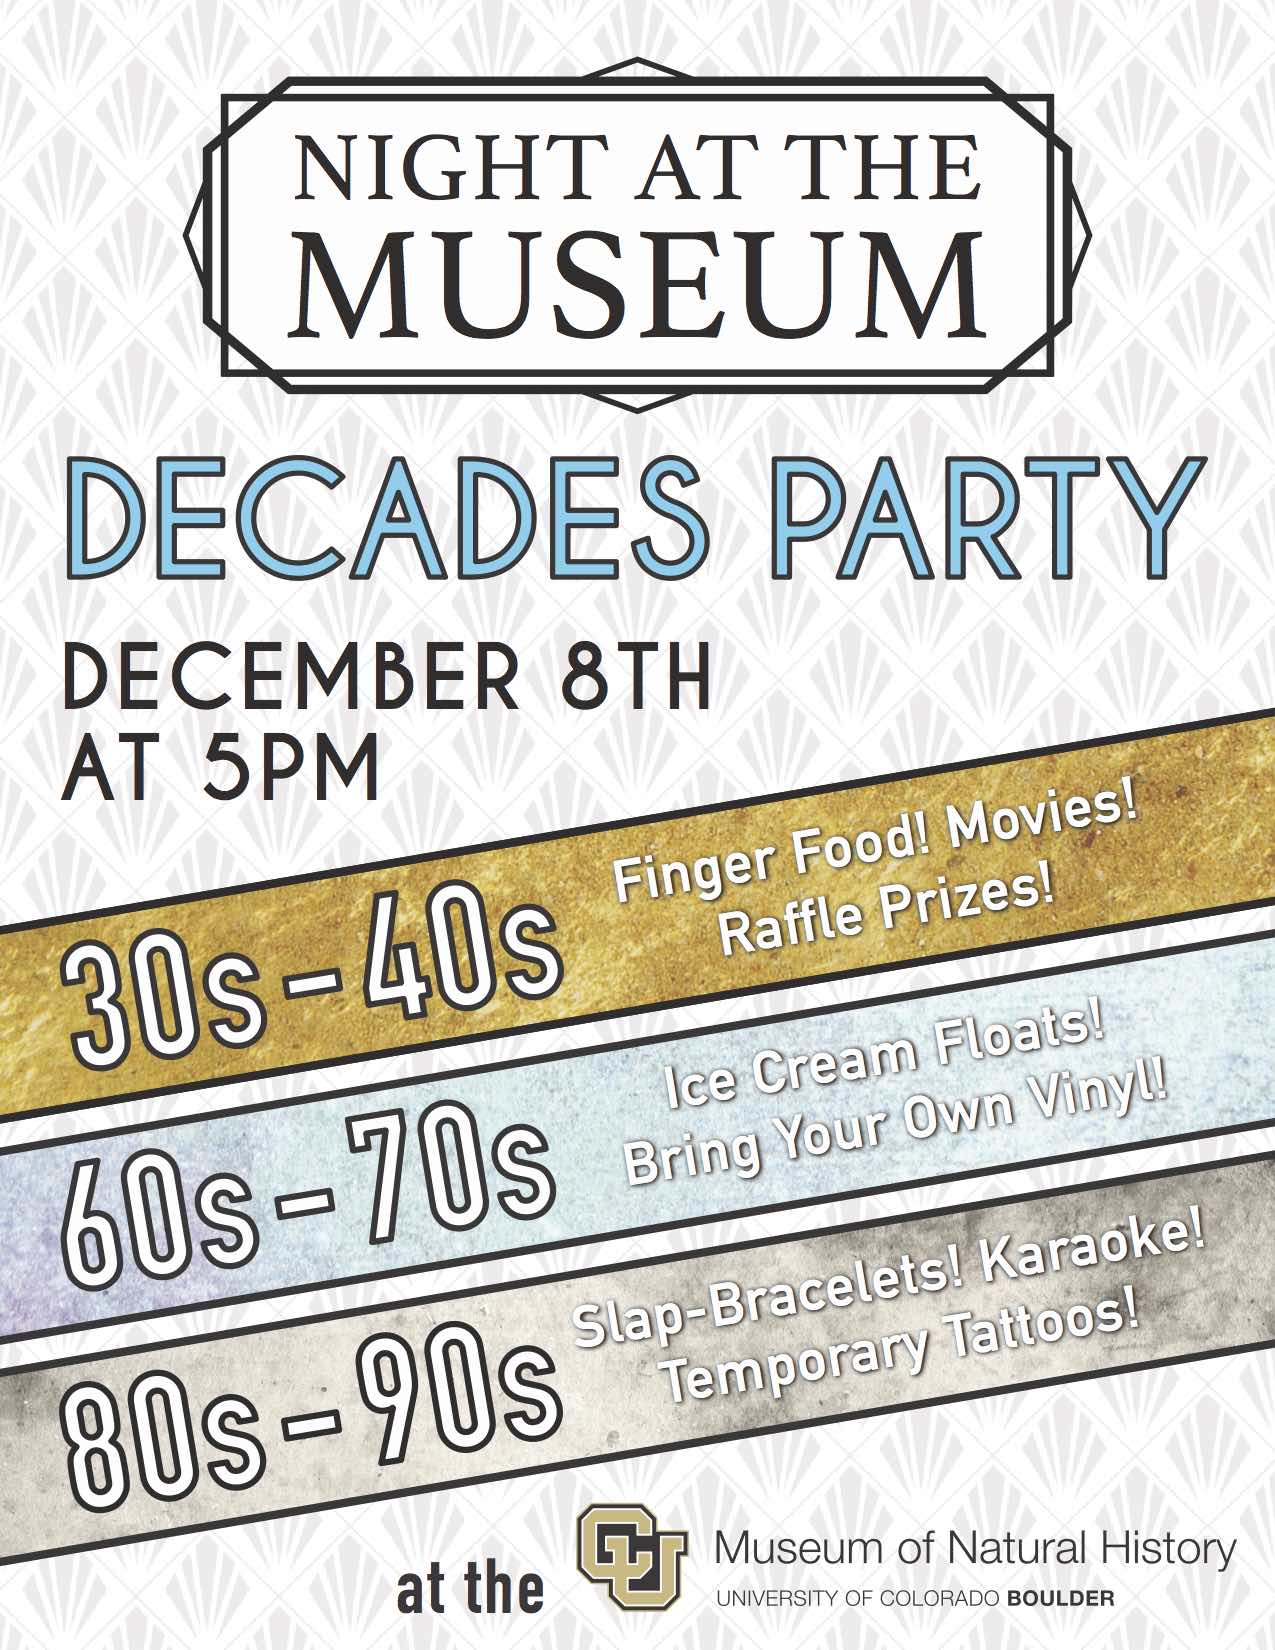 Night at the Museum: Decades Party Dec. 8 at 5 p.m.